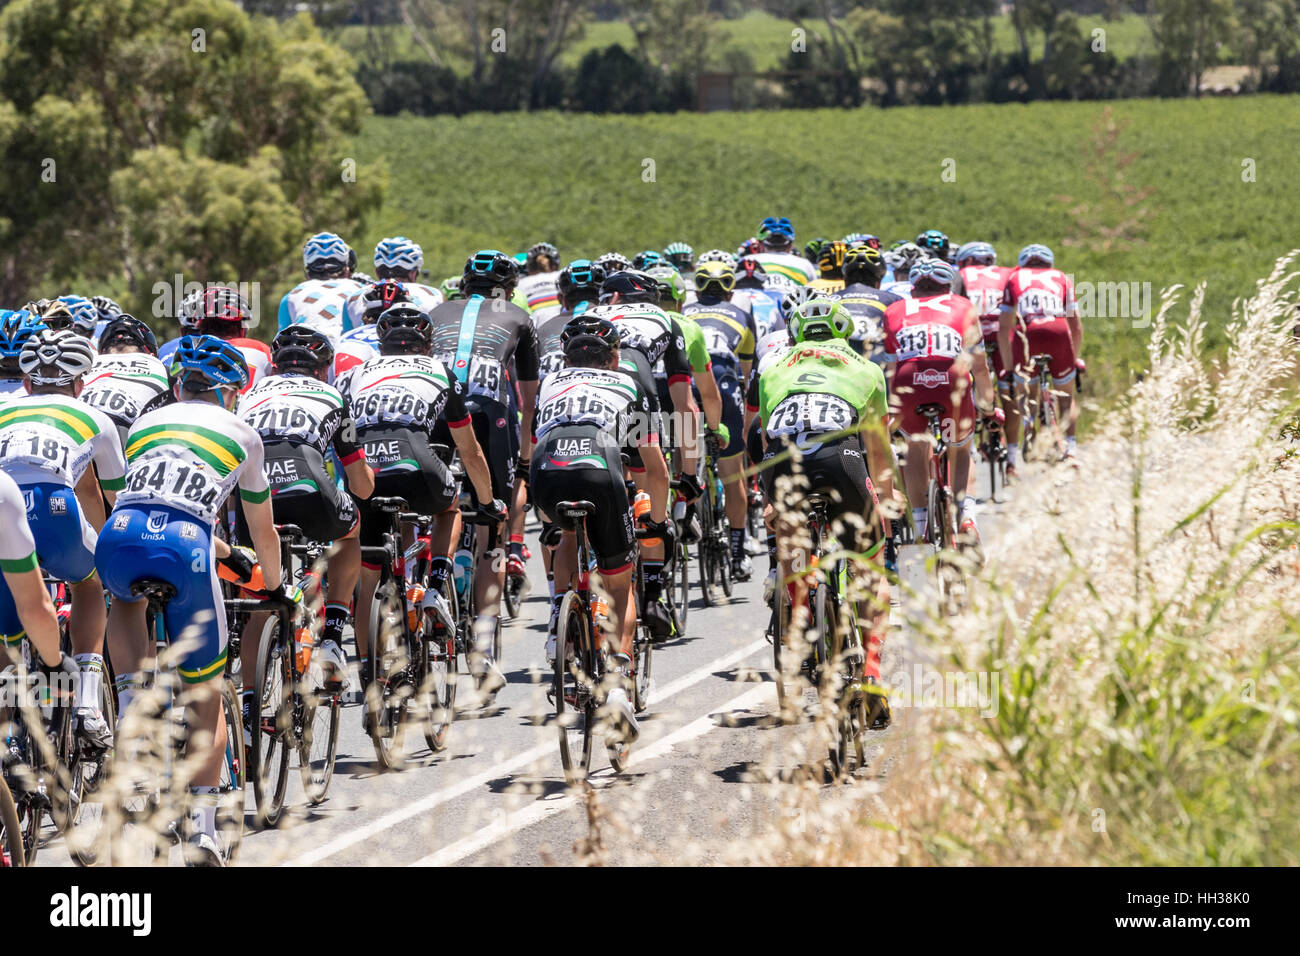 Adelaide, Australia. 17th January, 2017. Cyclists during Stage 1 of the Santos Tour Down Under 2017. Credit: Ryan Fletcher/Alamy Live News Stock Photo